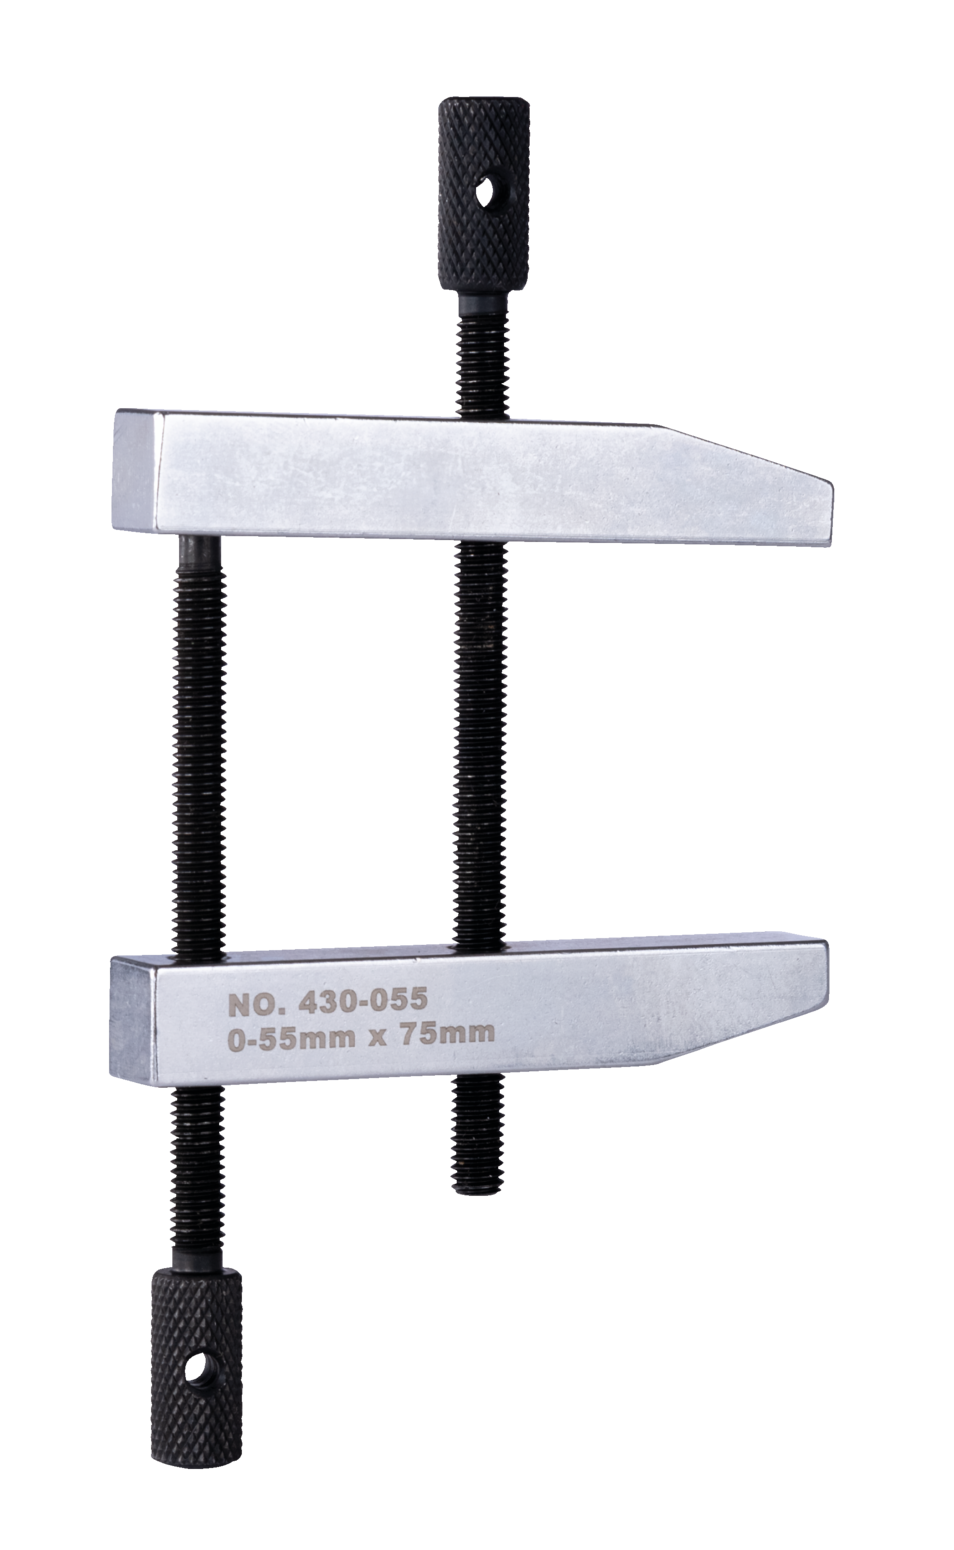 A 430 series parallel screw clamp for precise, parallel adjustment of clamping surfaces